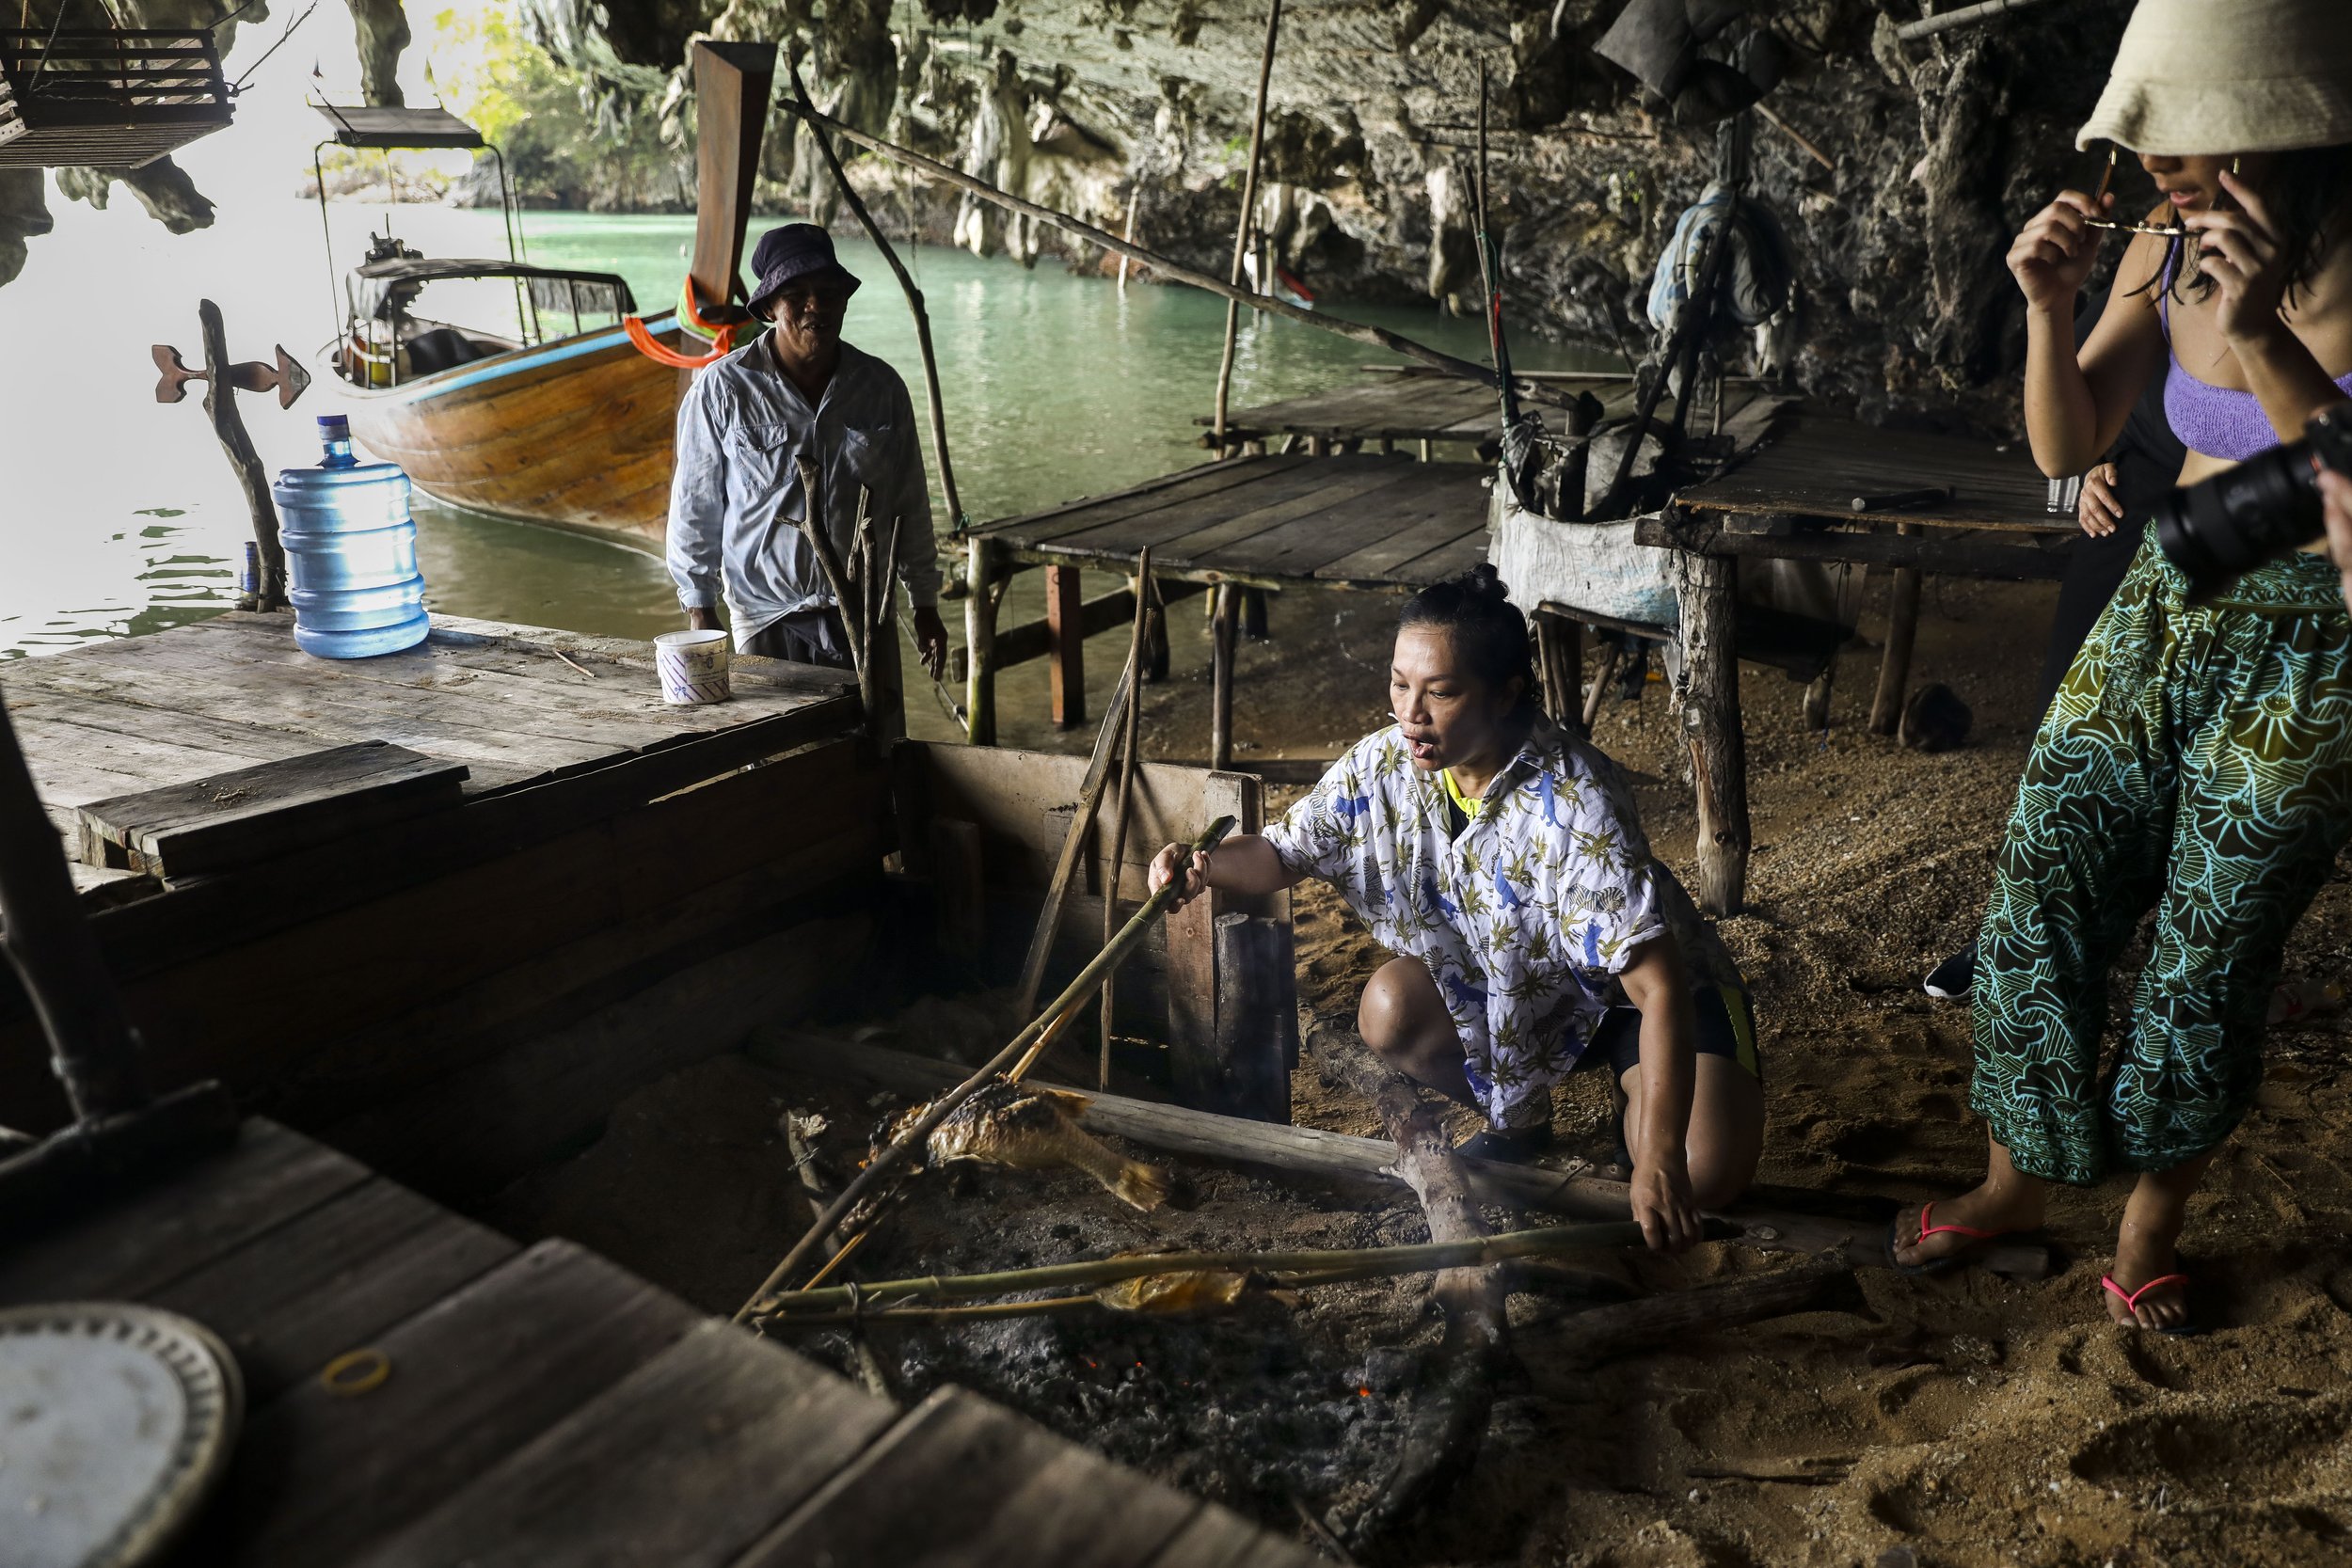  Chutatip “Nok” Suntaranon flips fish cooking over a fire in a fisherman's cave in Koh Yao Noi, Thailand on Tuesday, April 19, 2022. The fisherman's cave in Koh Yao Noi is where fisherman take shelter from storms while out working. 